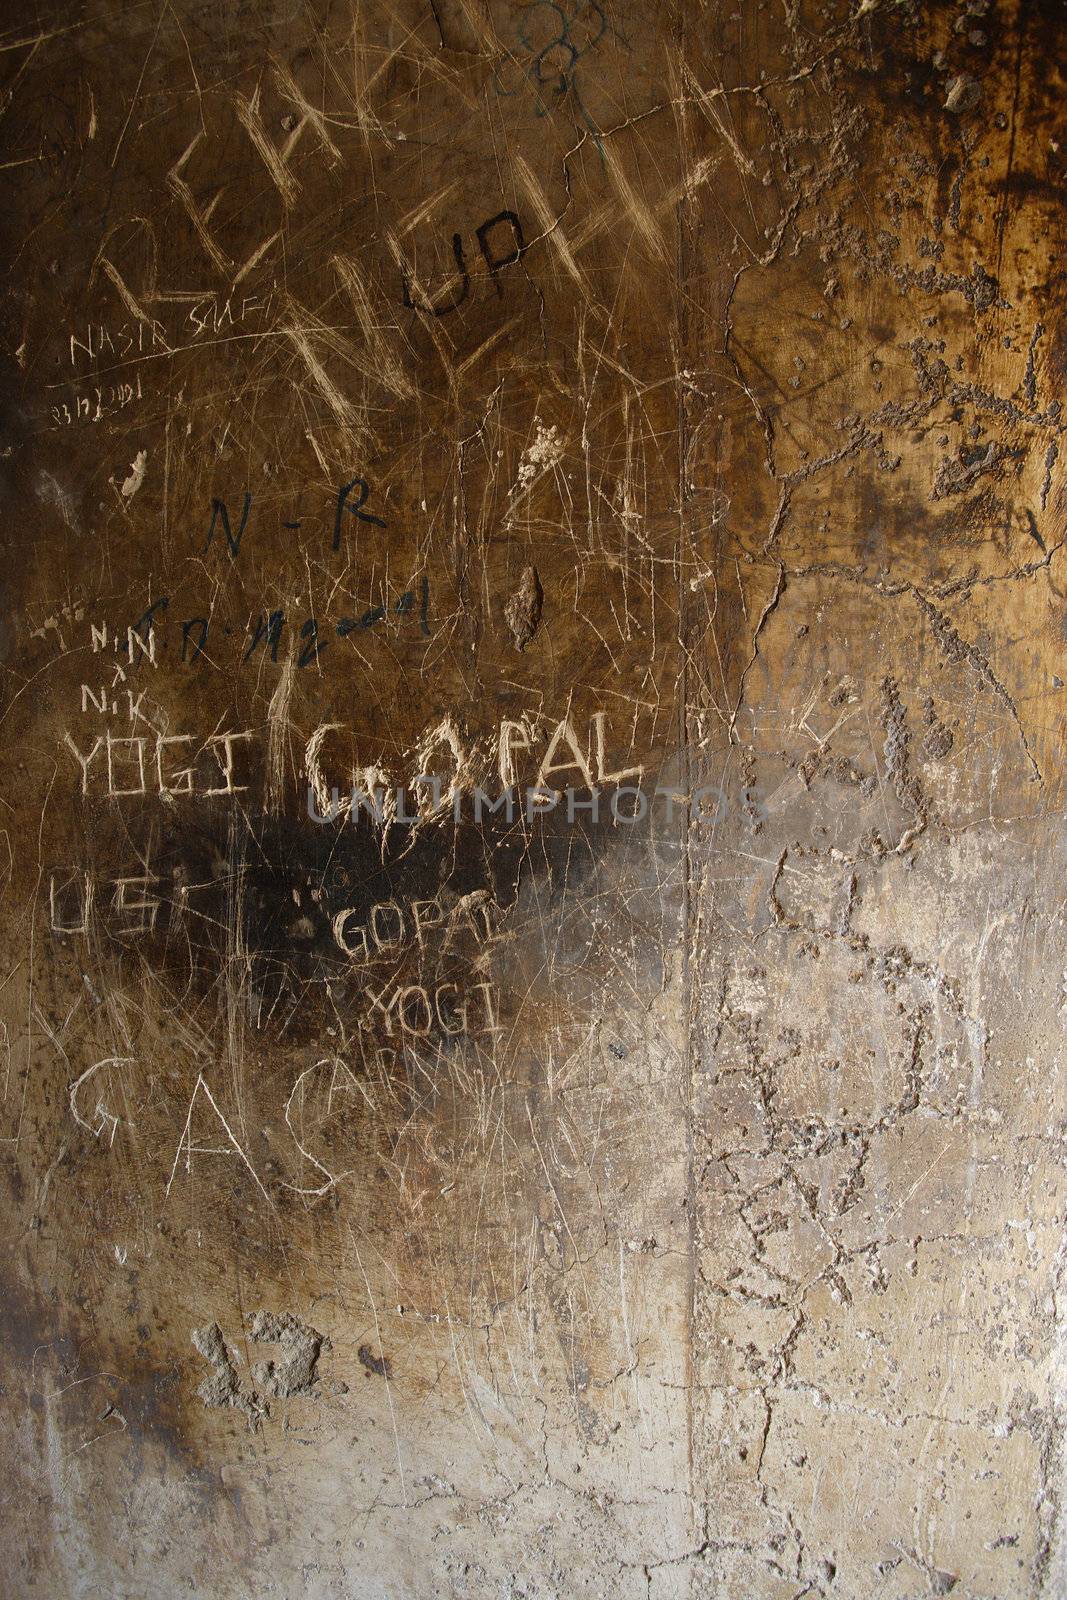 A wall of a temple in india that has had visitors scratch their names into the stone surface.
